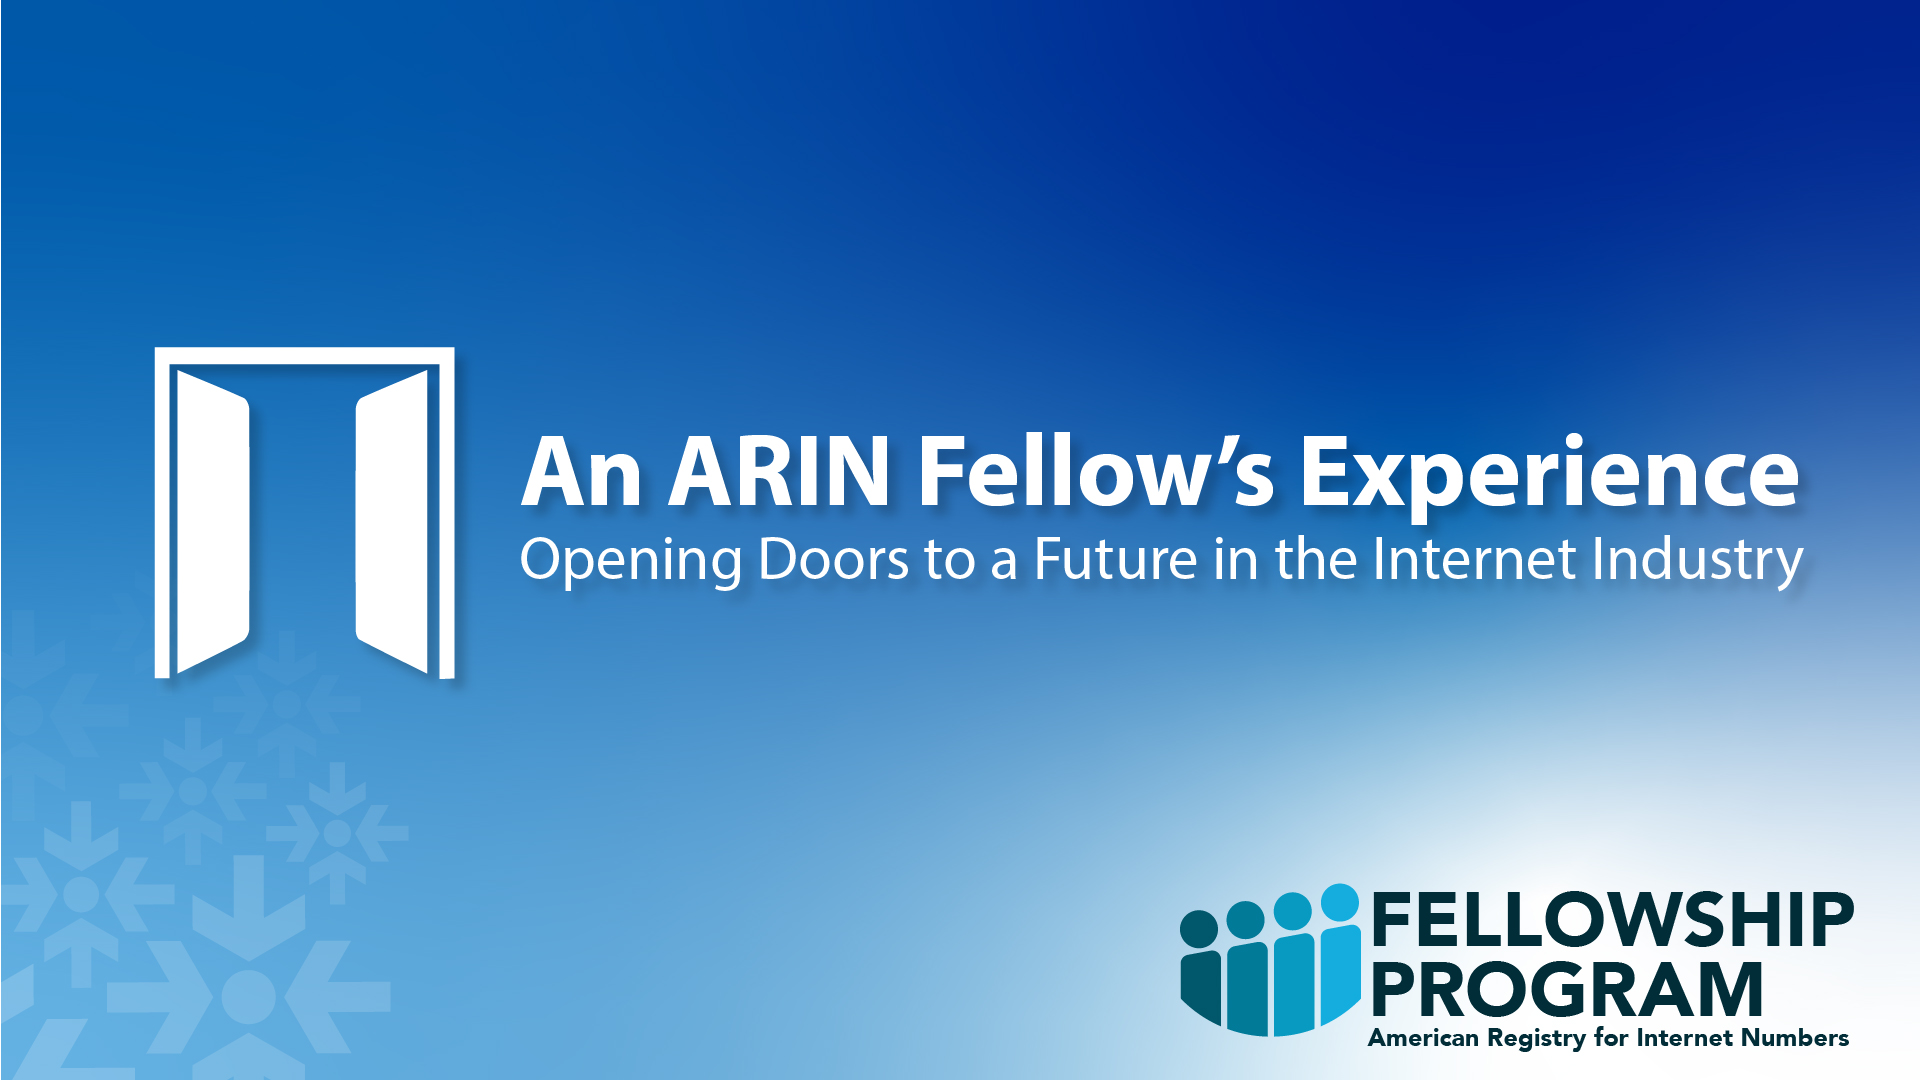 An ARIN Fellow’s Experience: Opening Doors to a Future in the Internet Industry